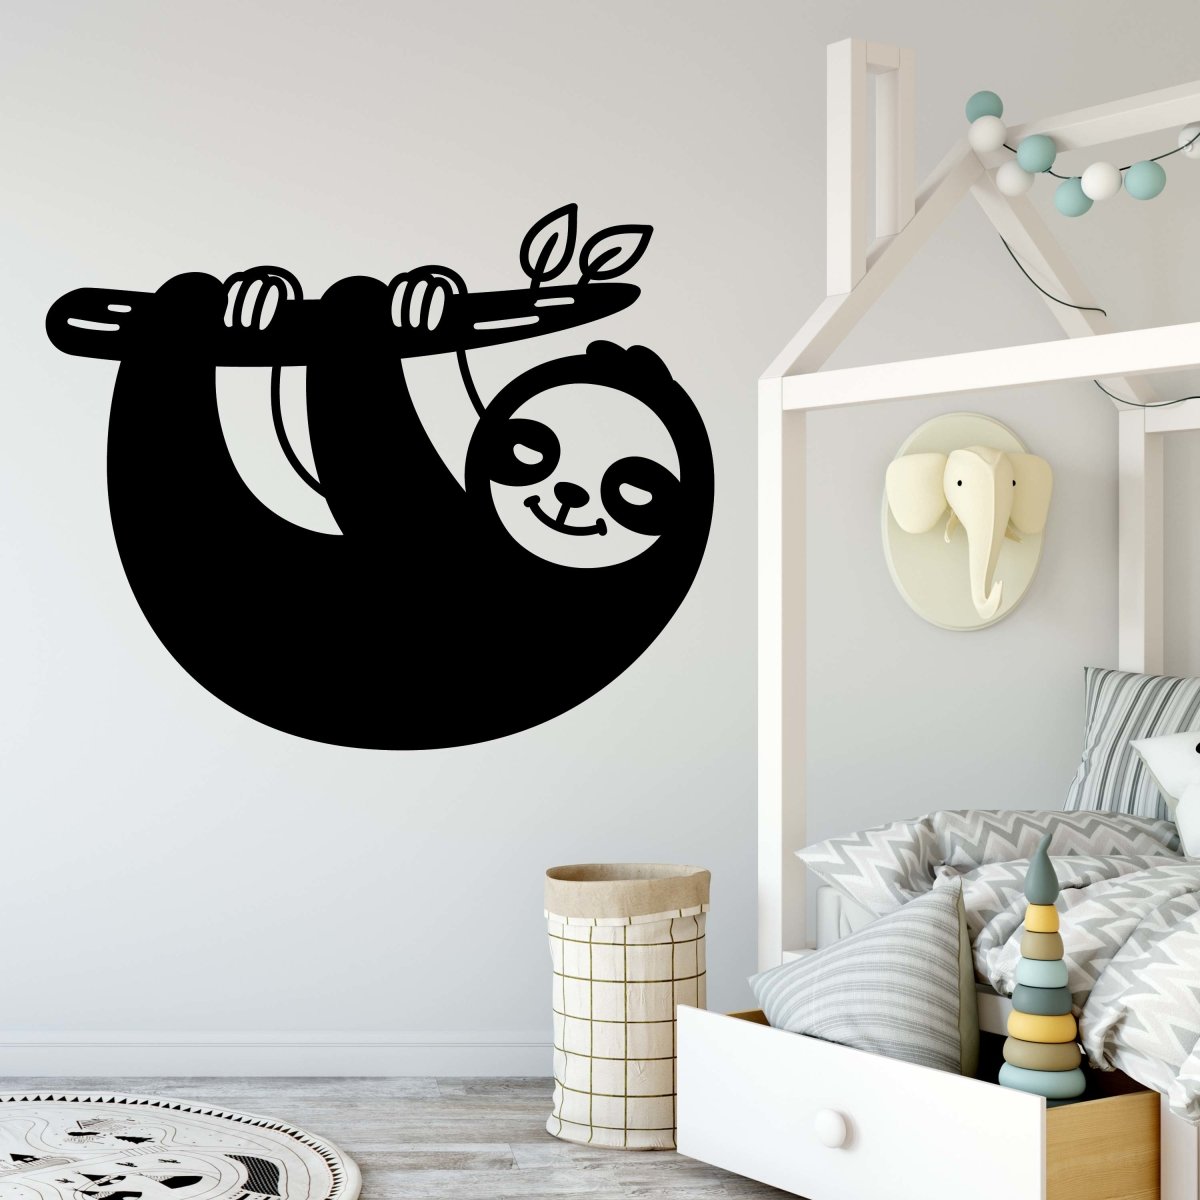 Discover the wall decal a on WT00000070 sloth branch